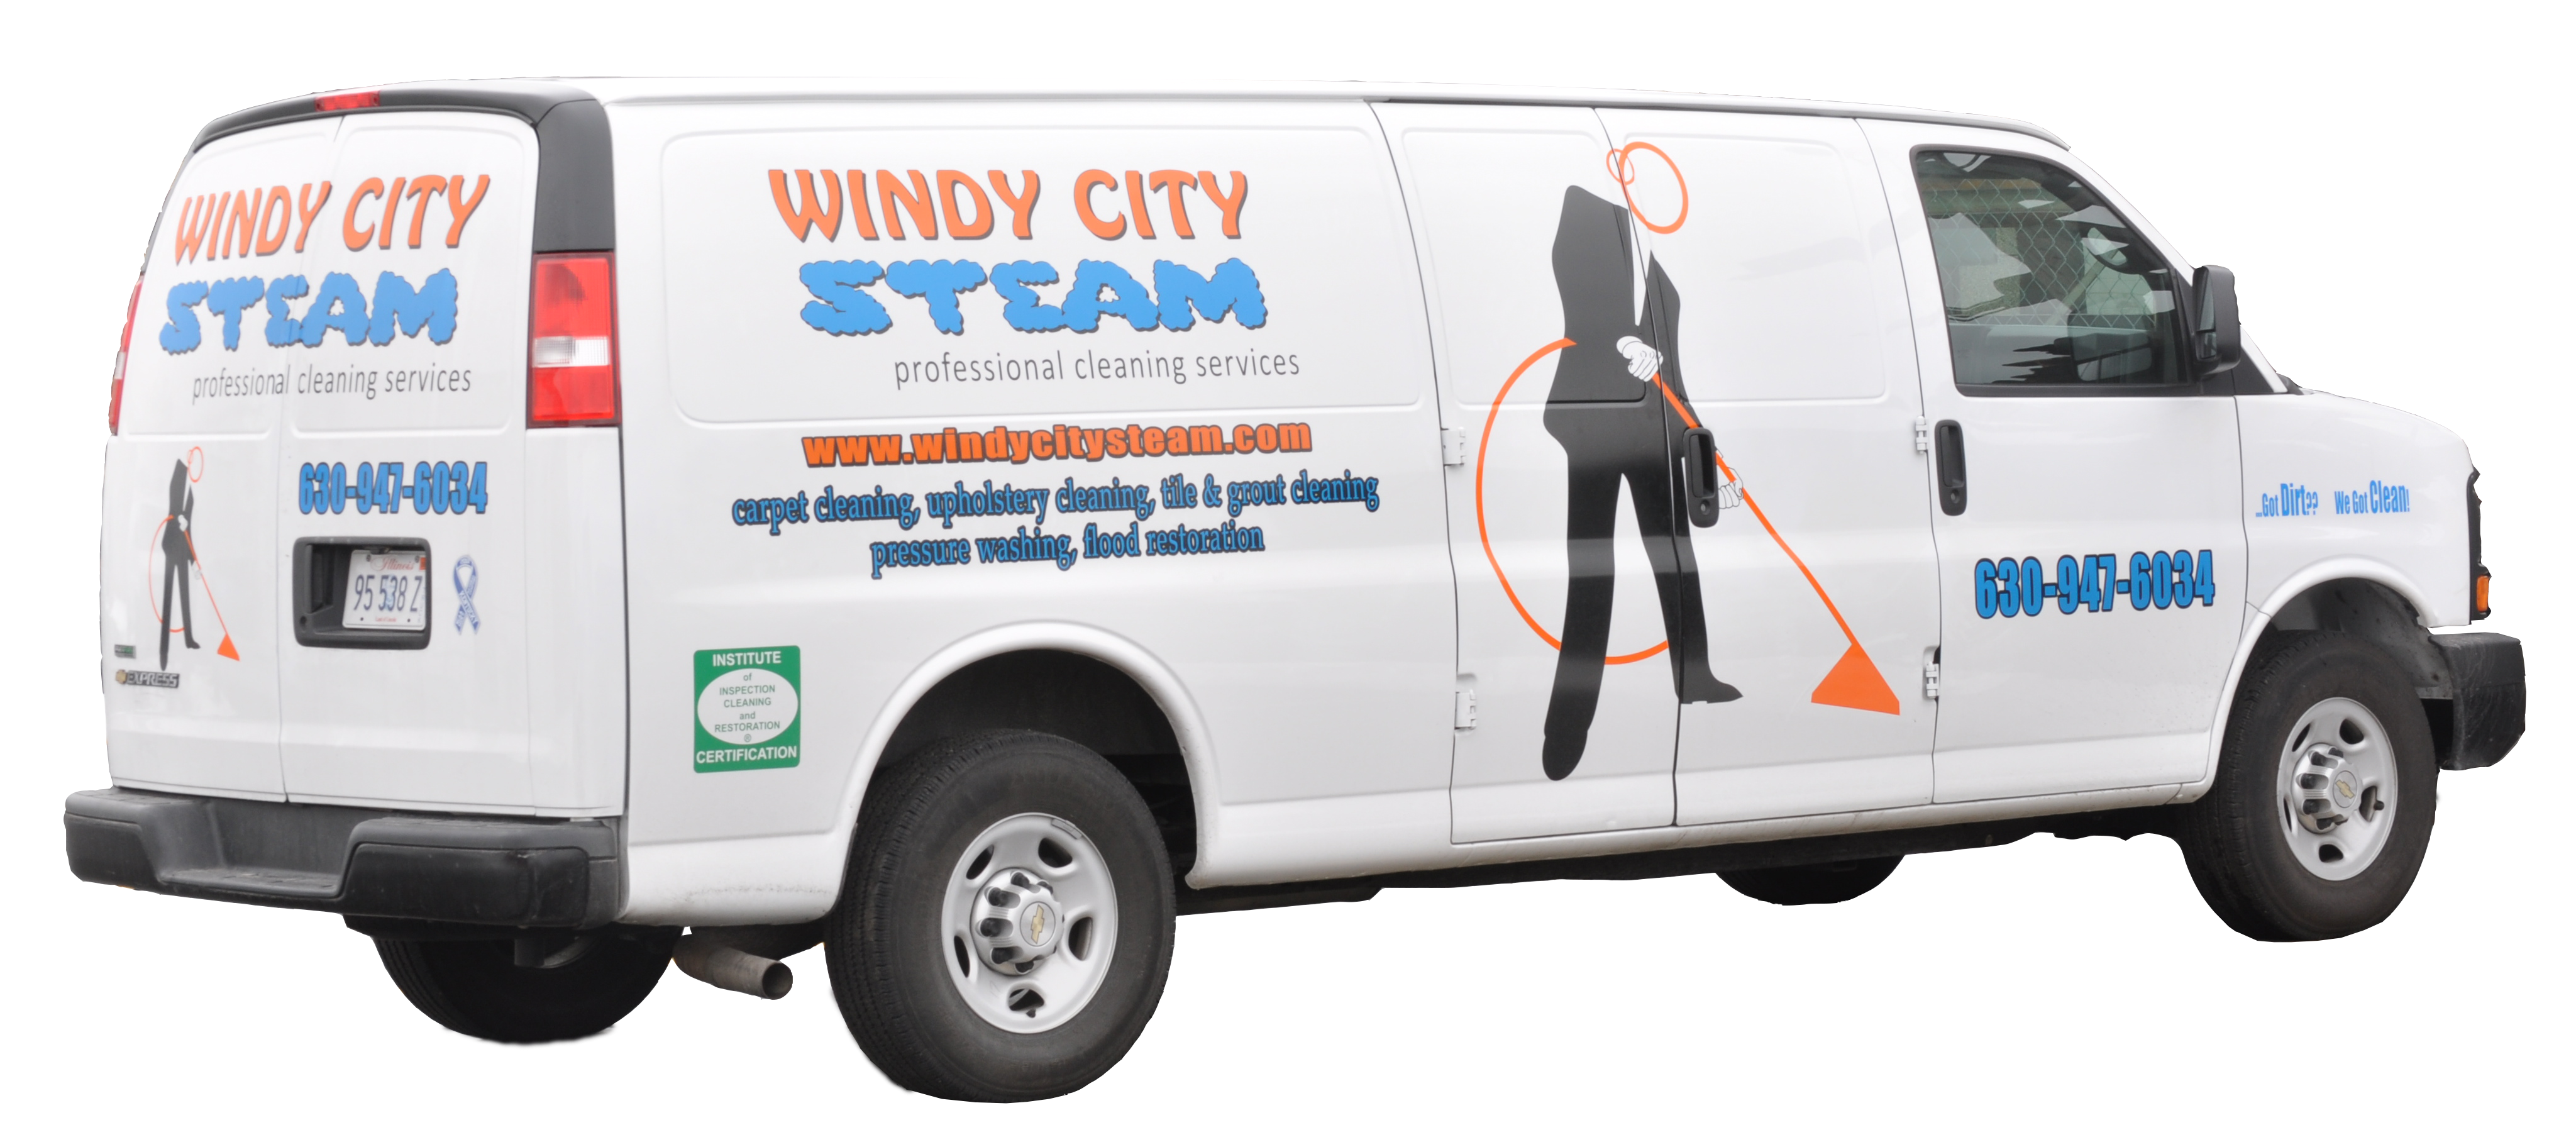 City steam carpet cleaning. Windy clipart forest